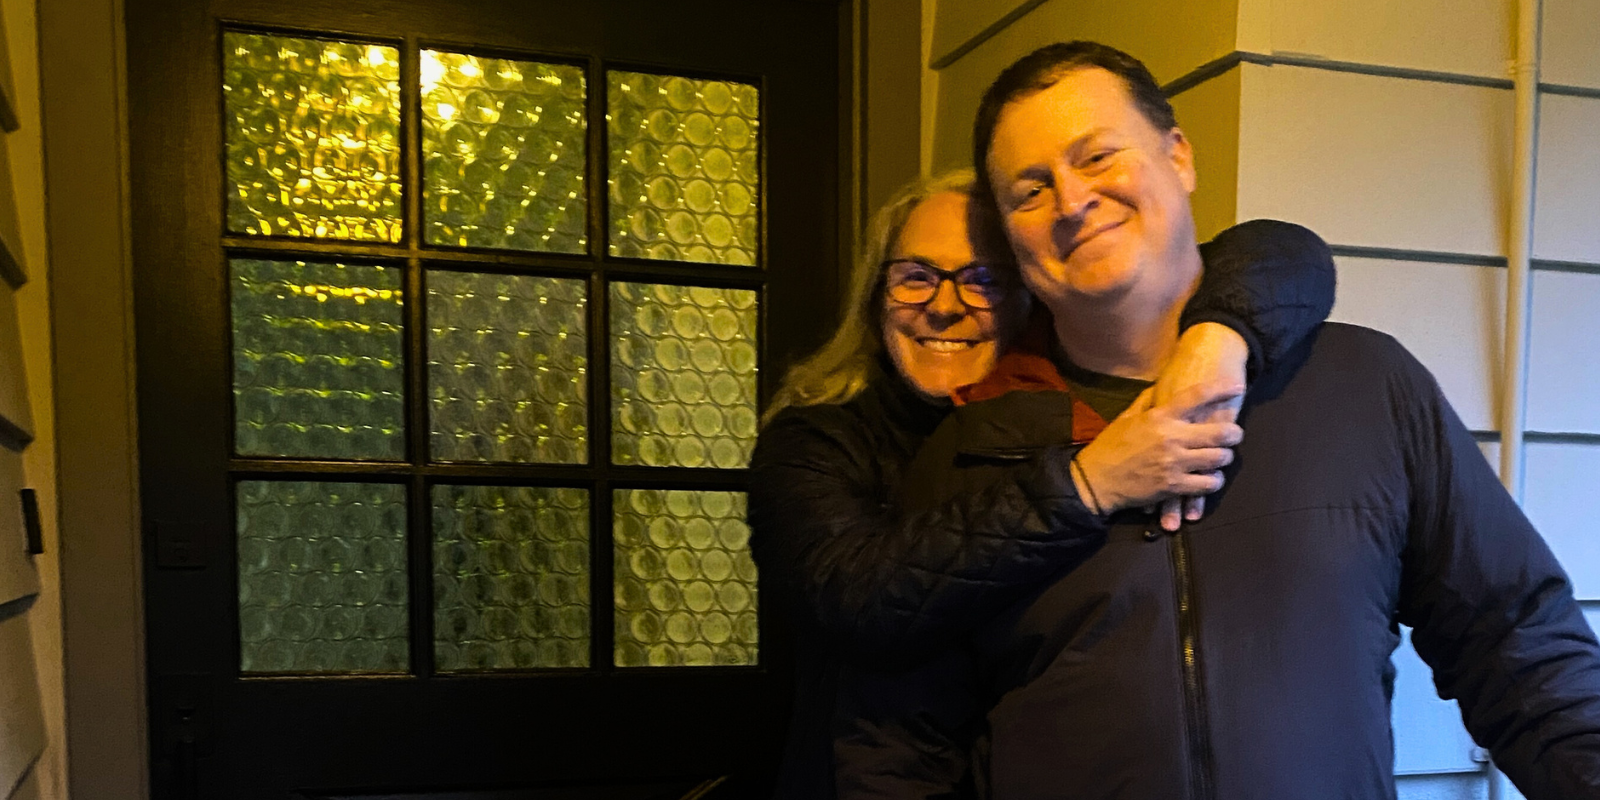 From North Portland to the Westside: A New Neighborhood for Patrick & JoAnne